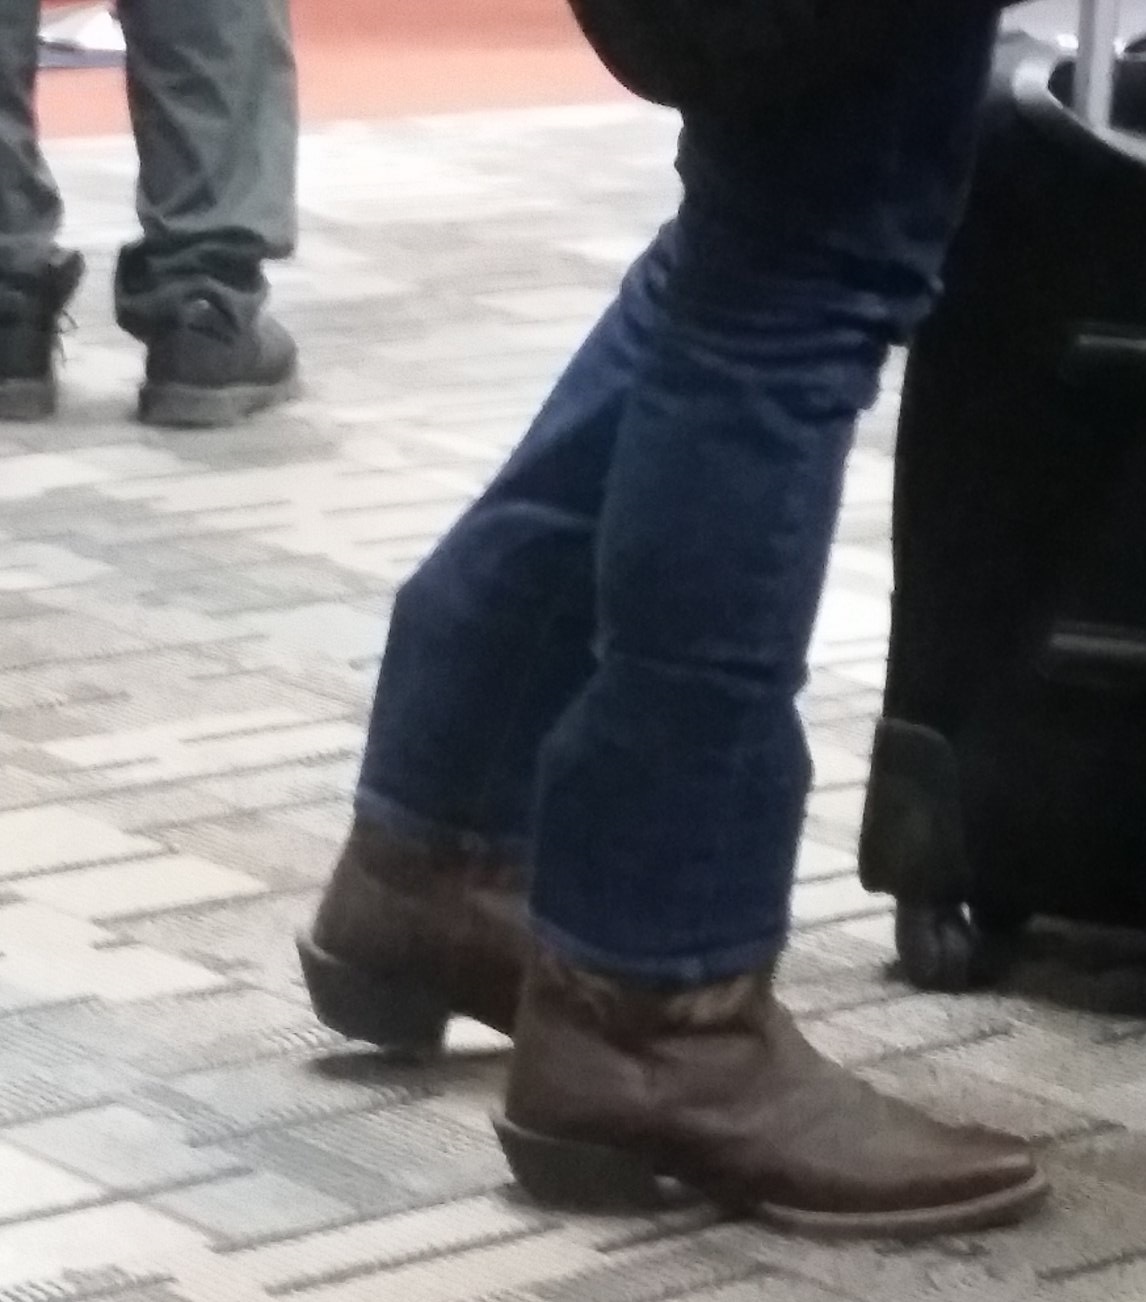 Do you wear your jeans inside or over your boots? : r/cowboyboots